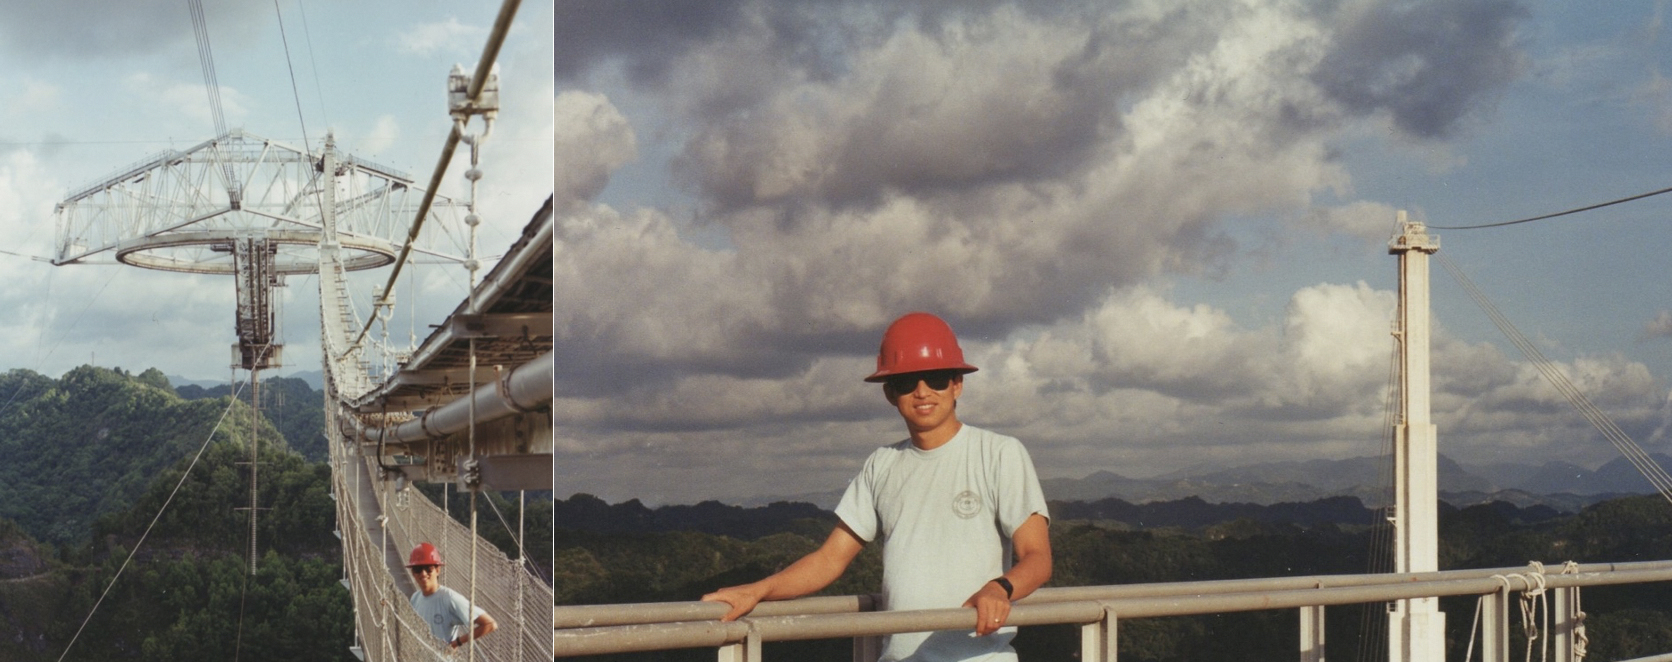 Qihou Zhou (shown here in 1993) chair and professor of electrical engineering, was a research scientist at Arecibo Observatory from 1991-2002. At left, he is standing on the catwalk, which is one way to access the instrument platform. At right he is standing on the top rim of the triangular structure seen at left, 500 feet high.